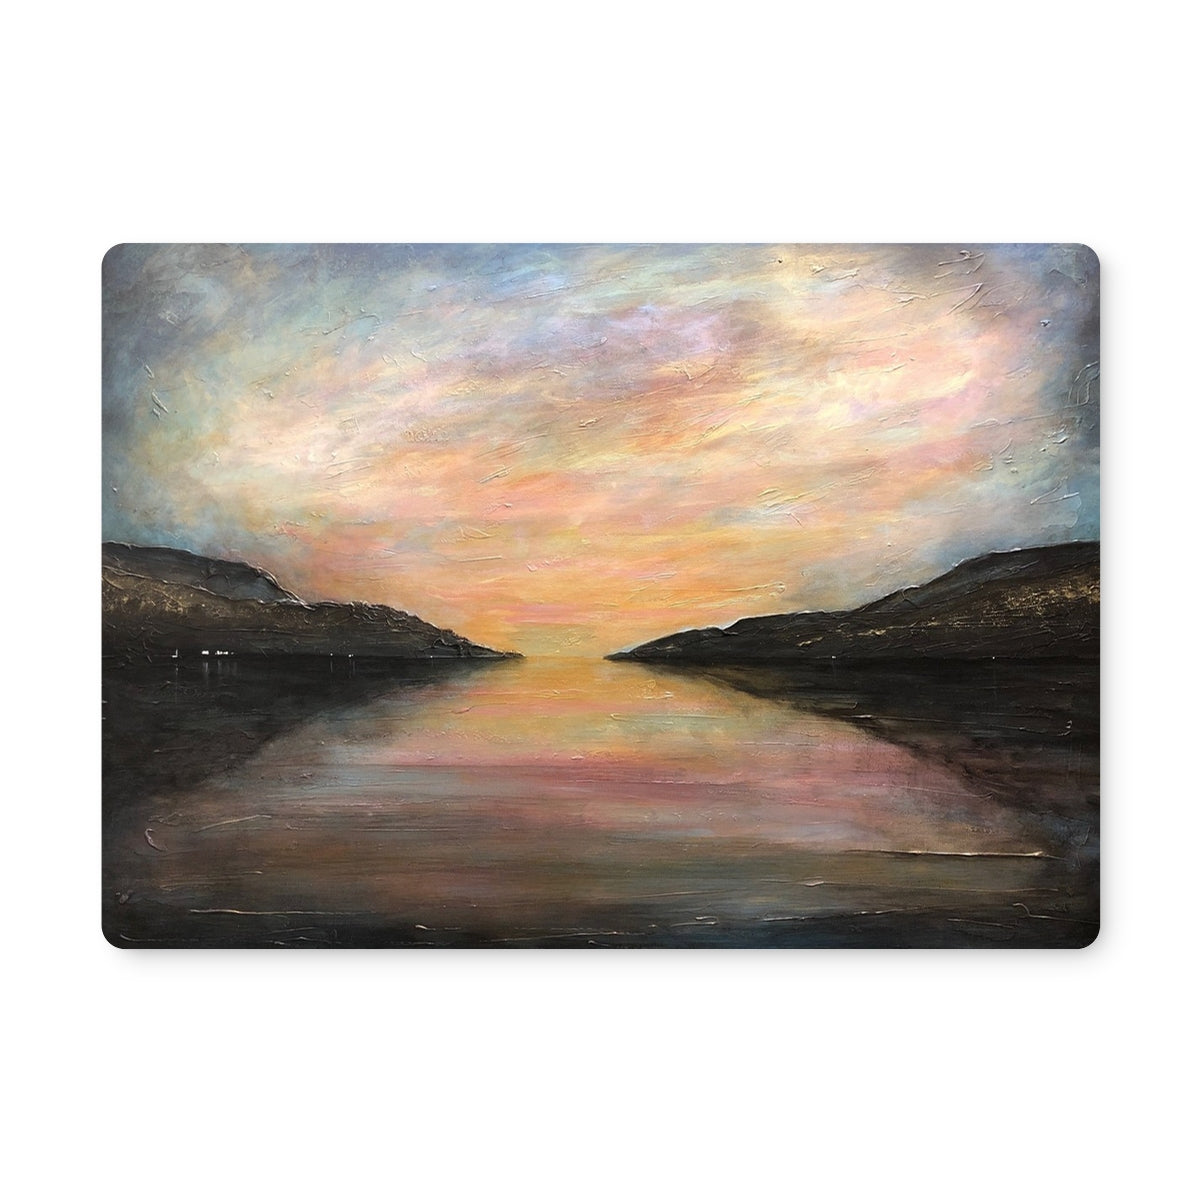 Loch Ness Glow Art Gifts Placemat